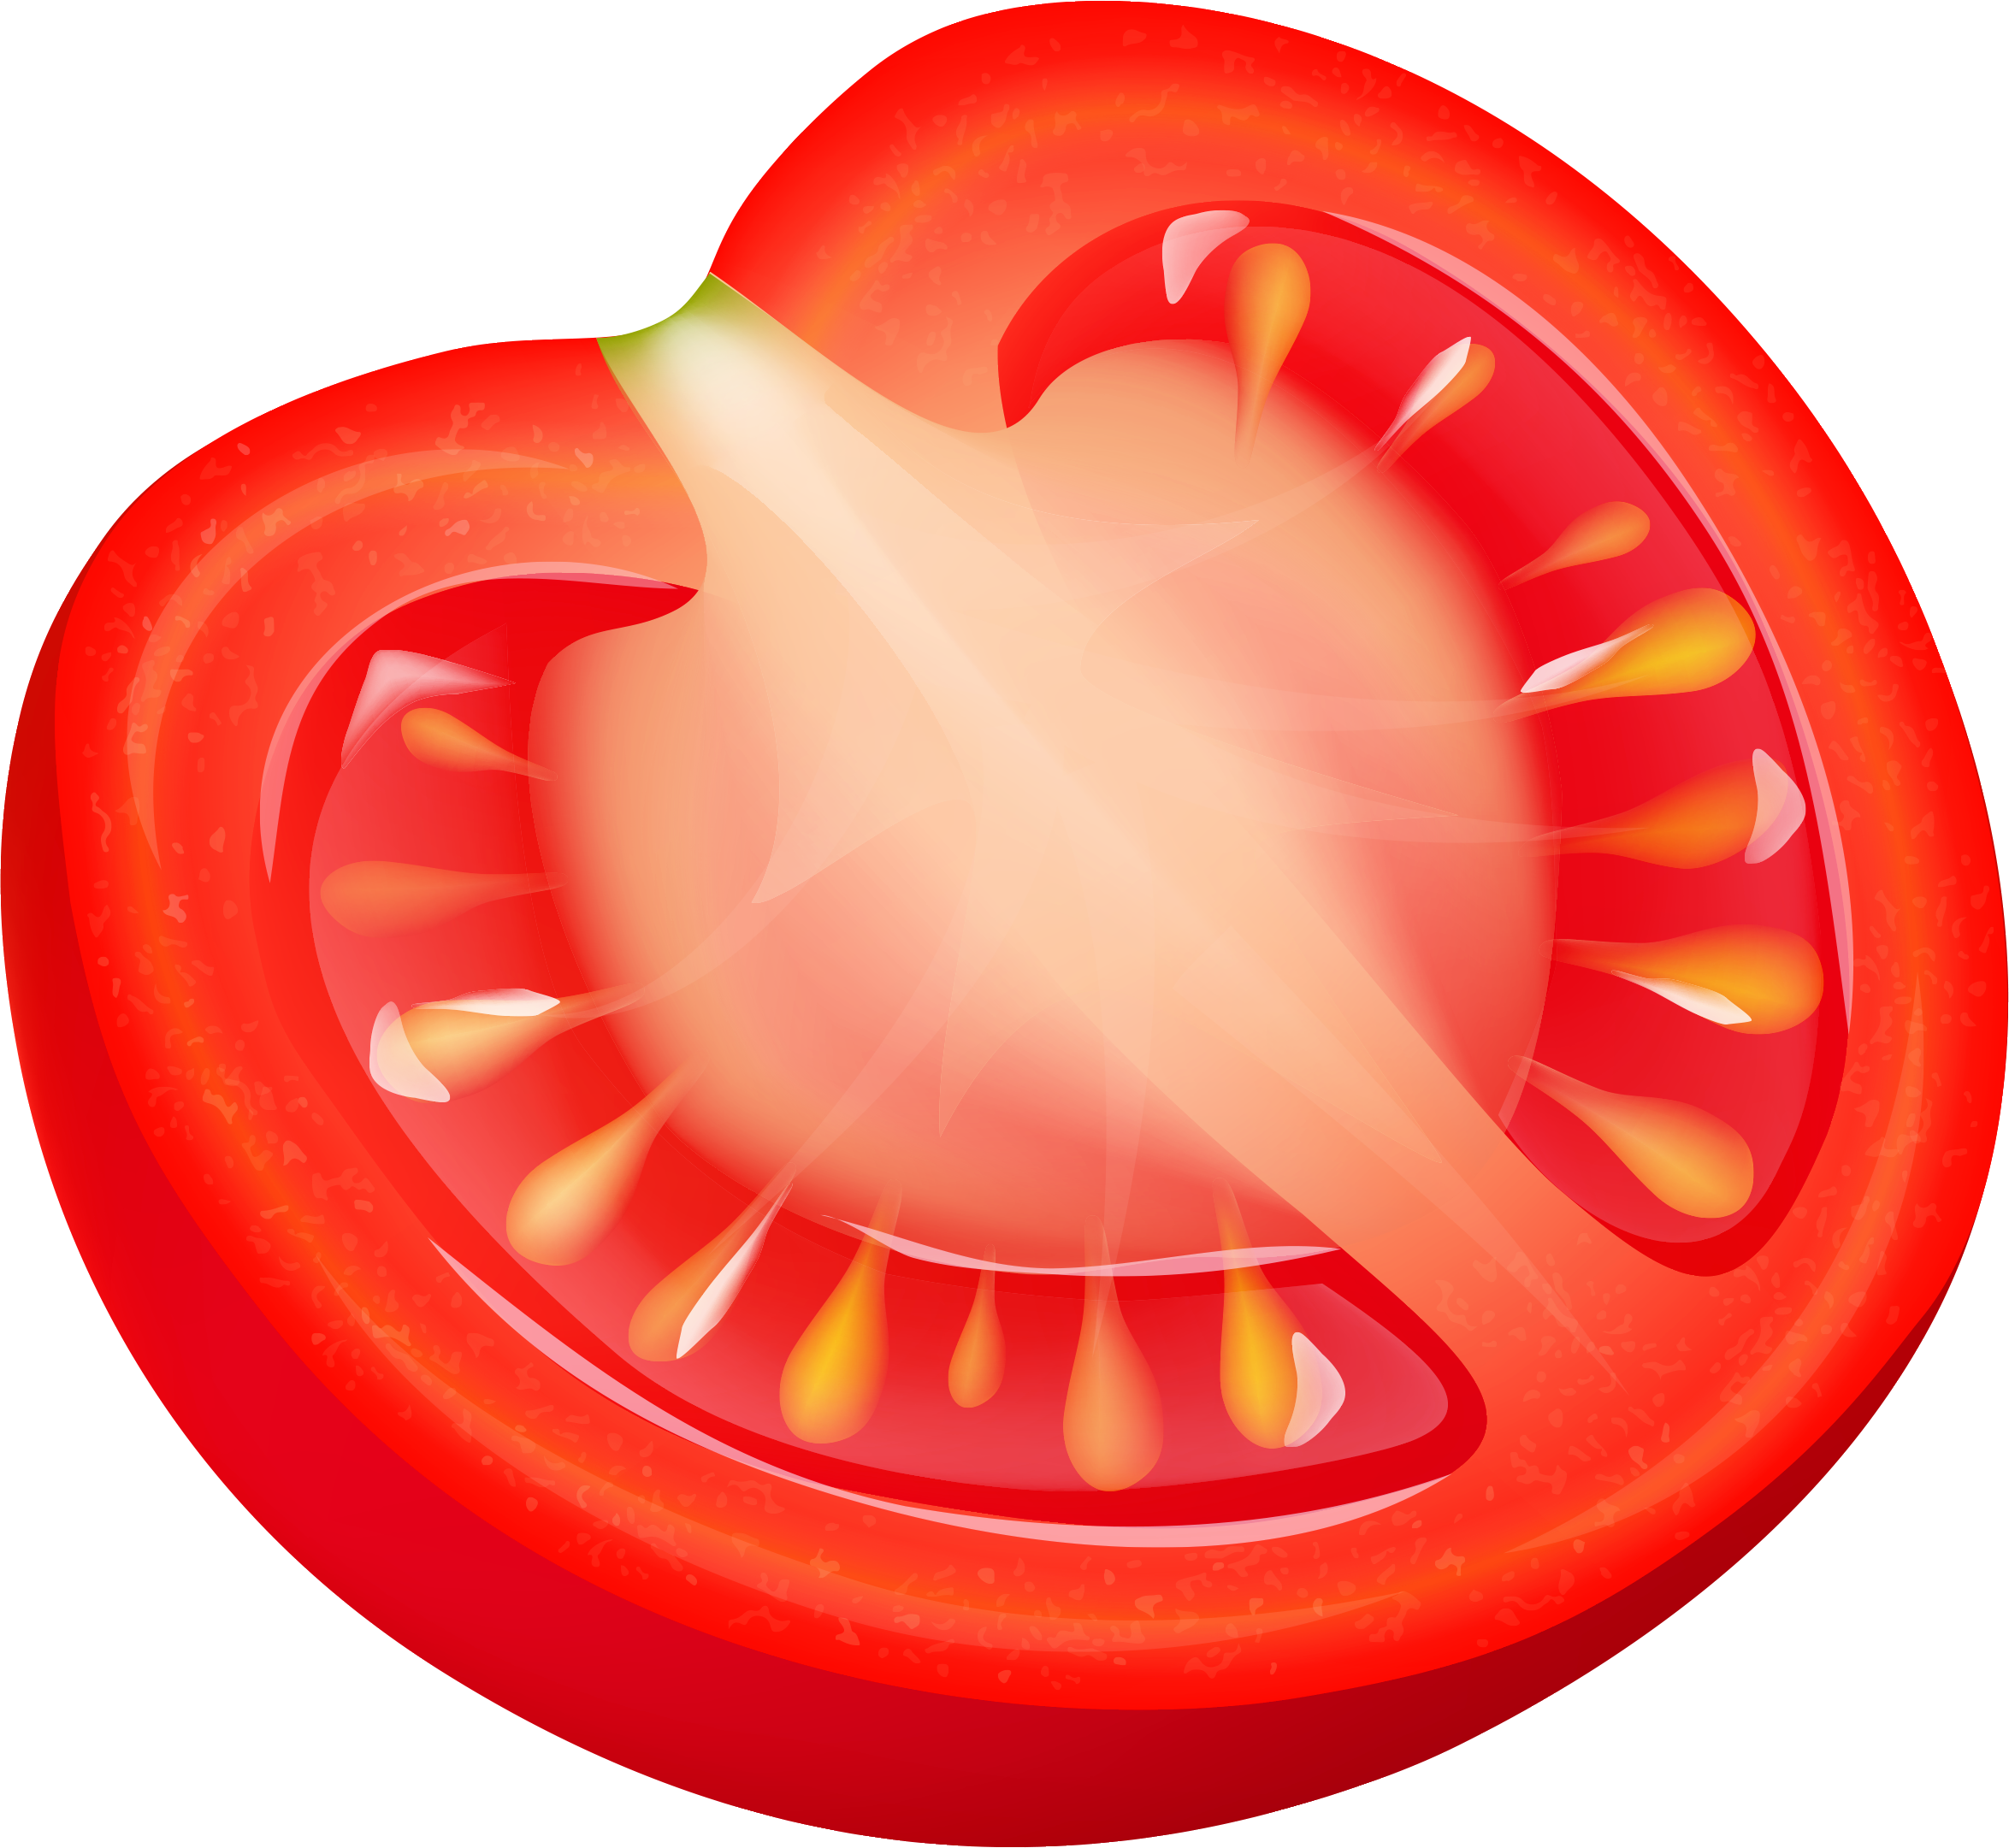 Cut tomato PNG